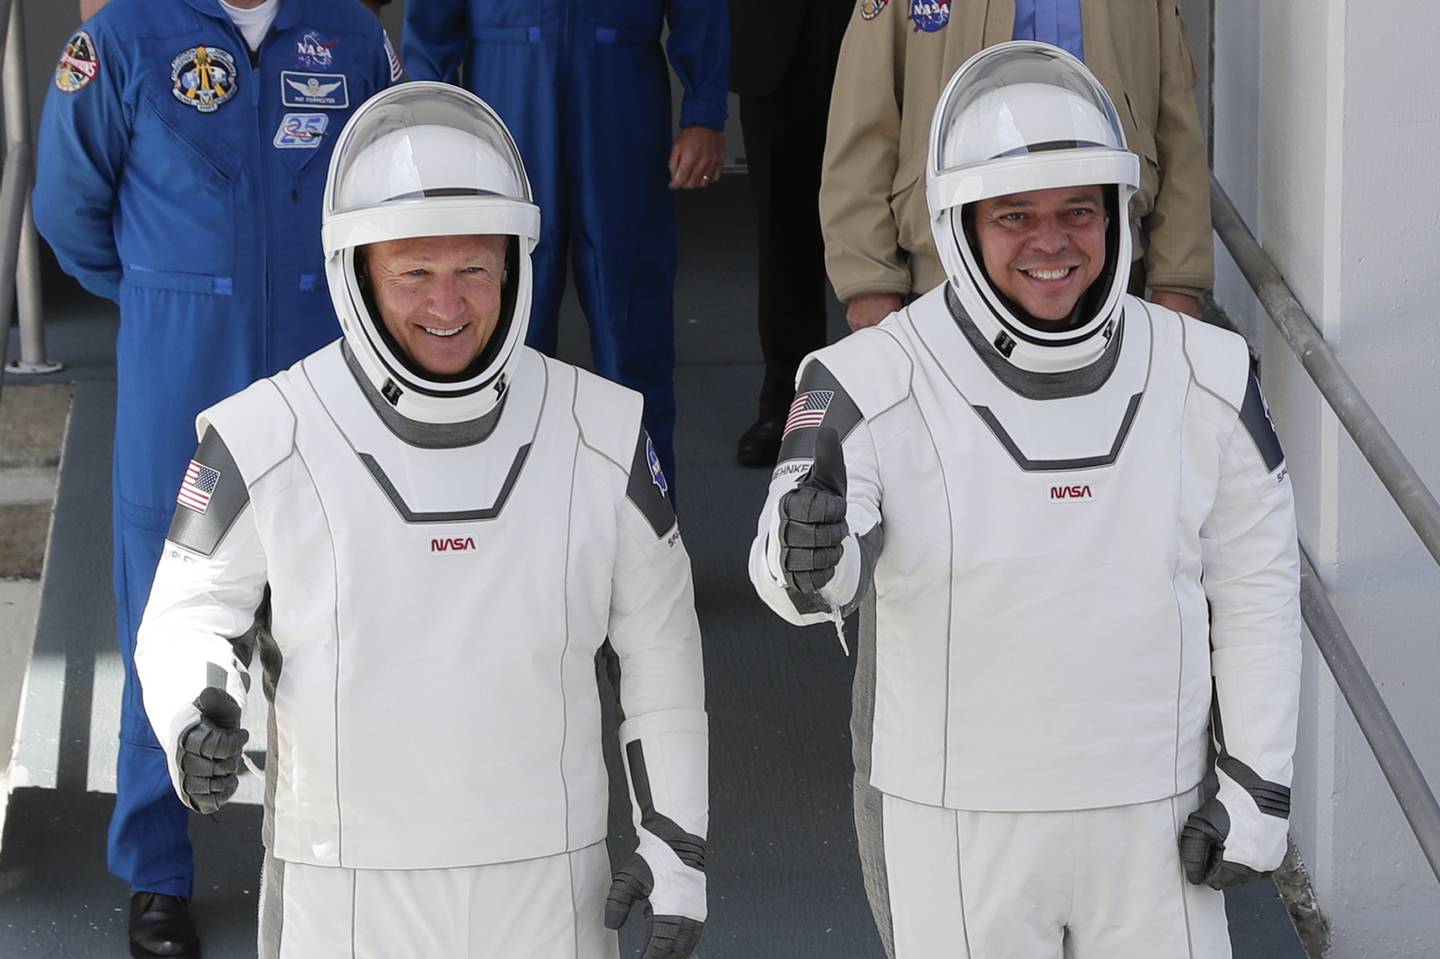 NASA astronauts Douglas Hurley, left, and Robert Behnken walk out of the Neil A. Armstrong Operations and Checkout Building on their way to Pad 39-A, at the Kennedy Space Center in Cape Canaveral, Fla., Saturday, May 30, 2020.